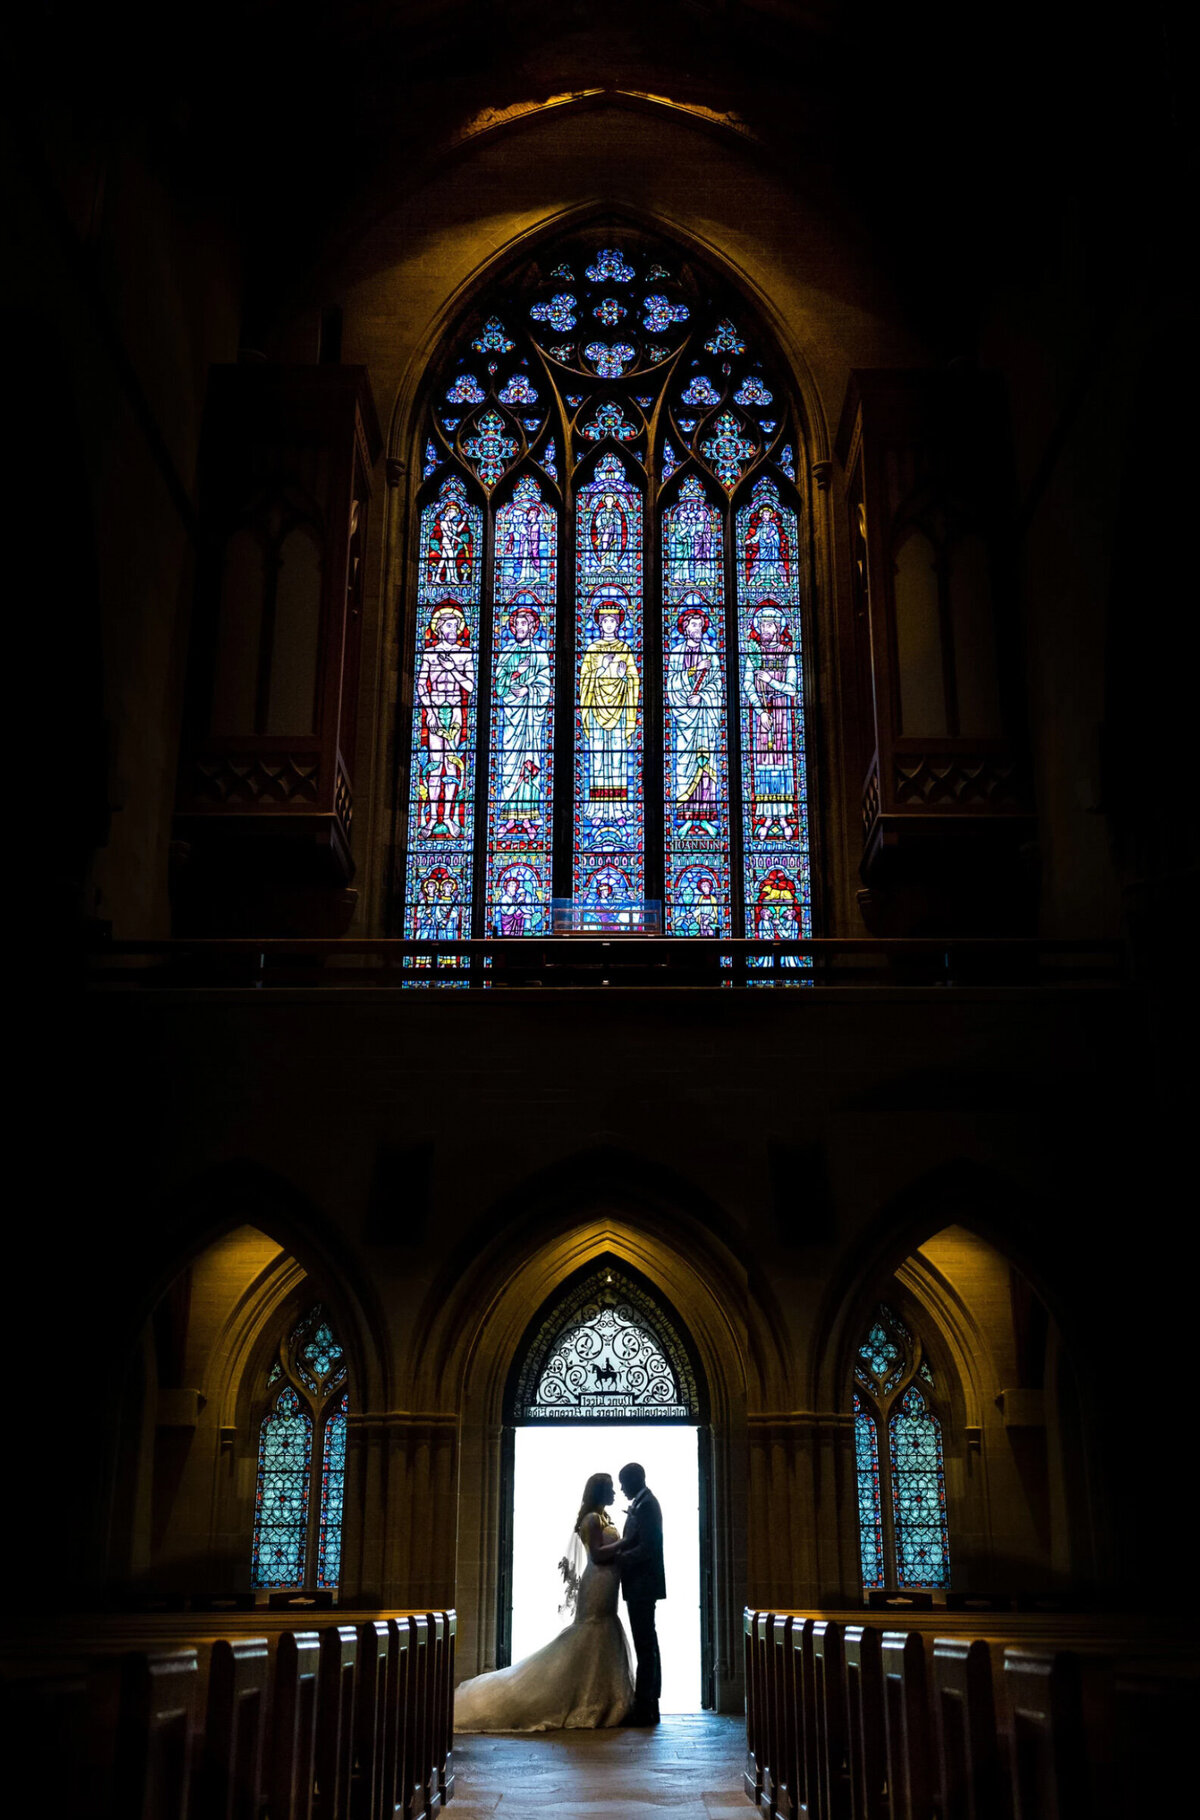 Silhouette of a bride and groom, inside the doorway of Bryn Athyn Cathedral, under a large stained glass window